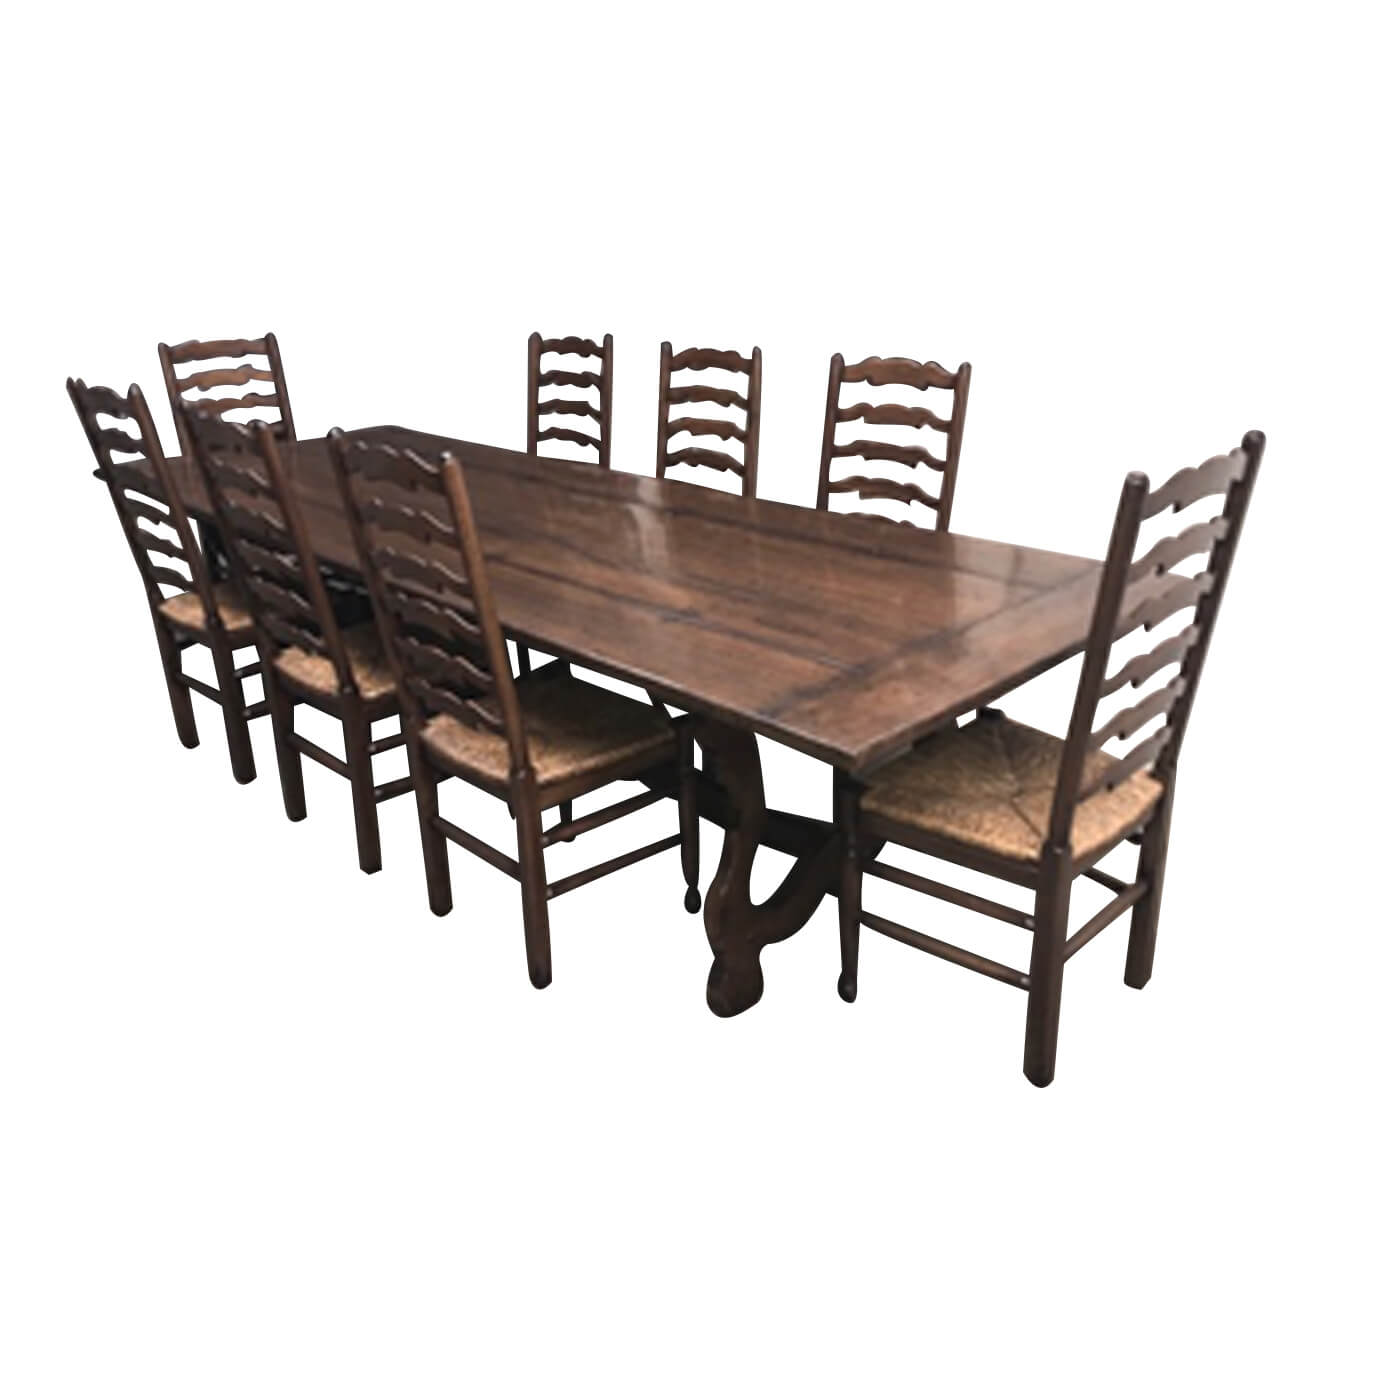 Two Design Lovers Spanish Style Dining Table Hero 2 